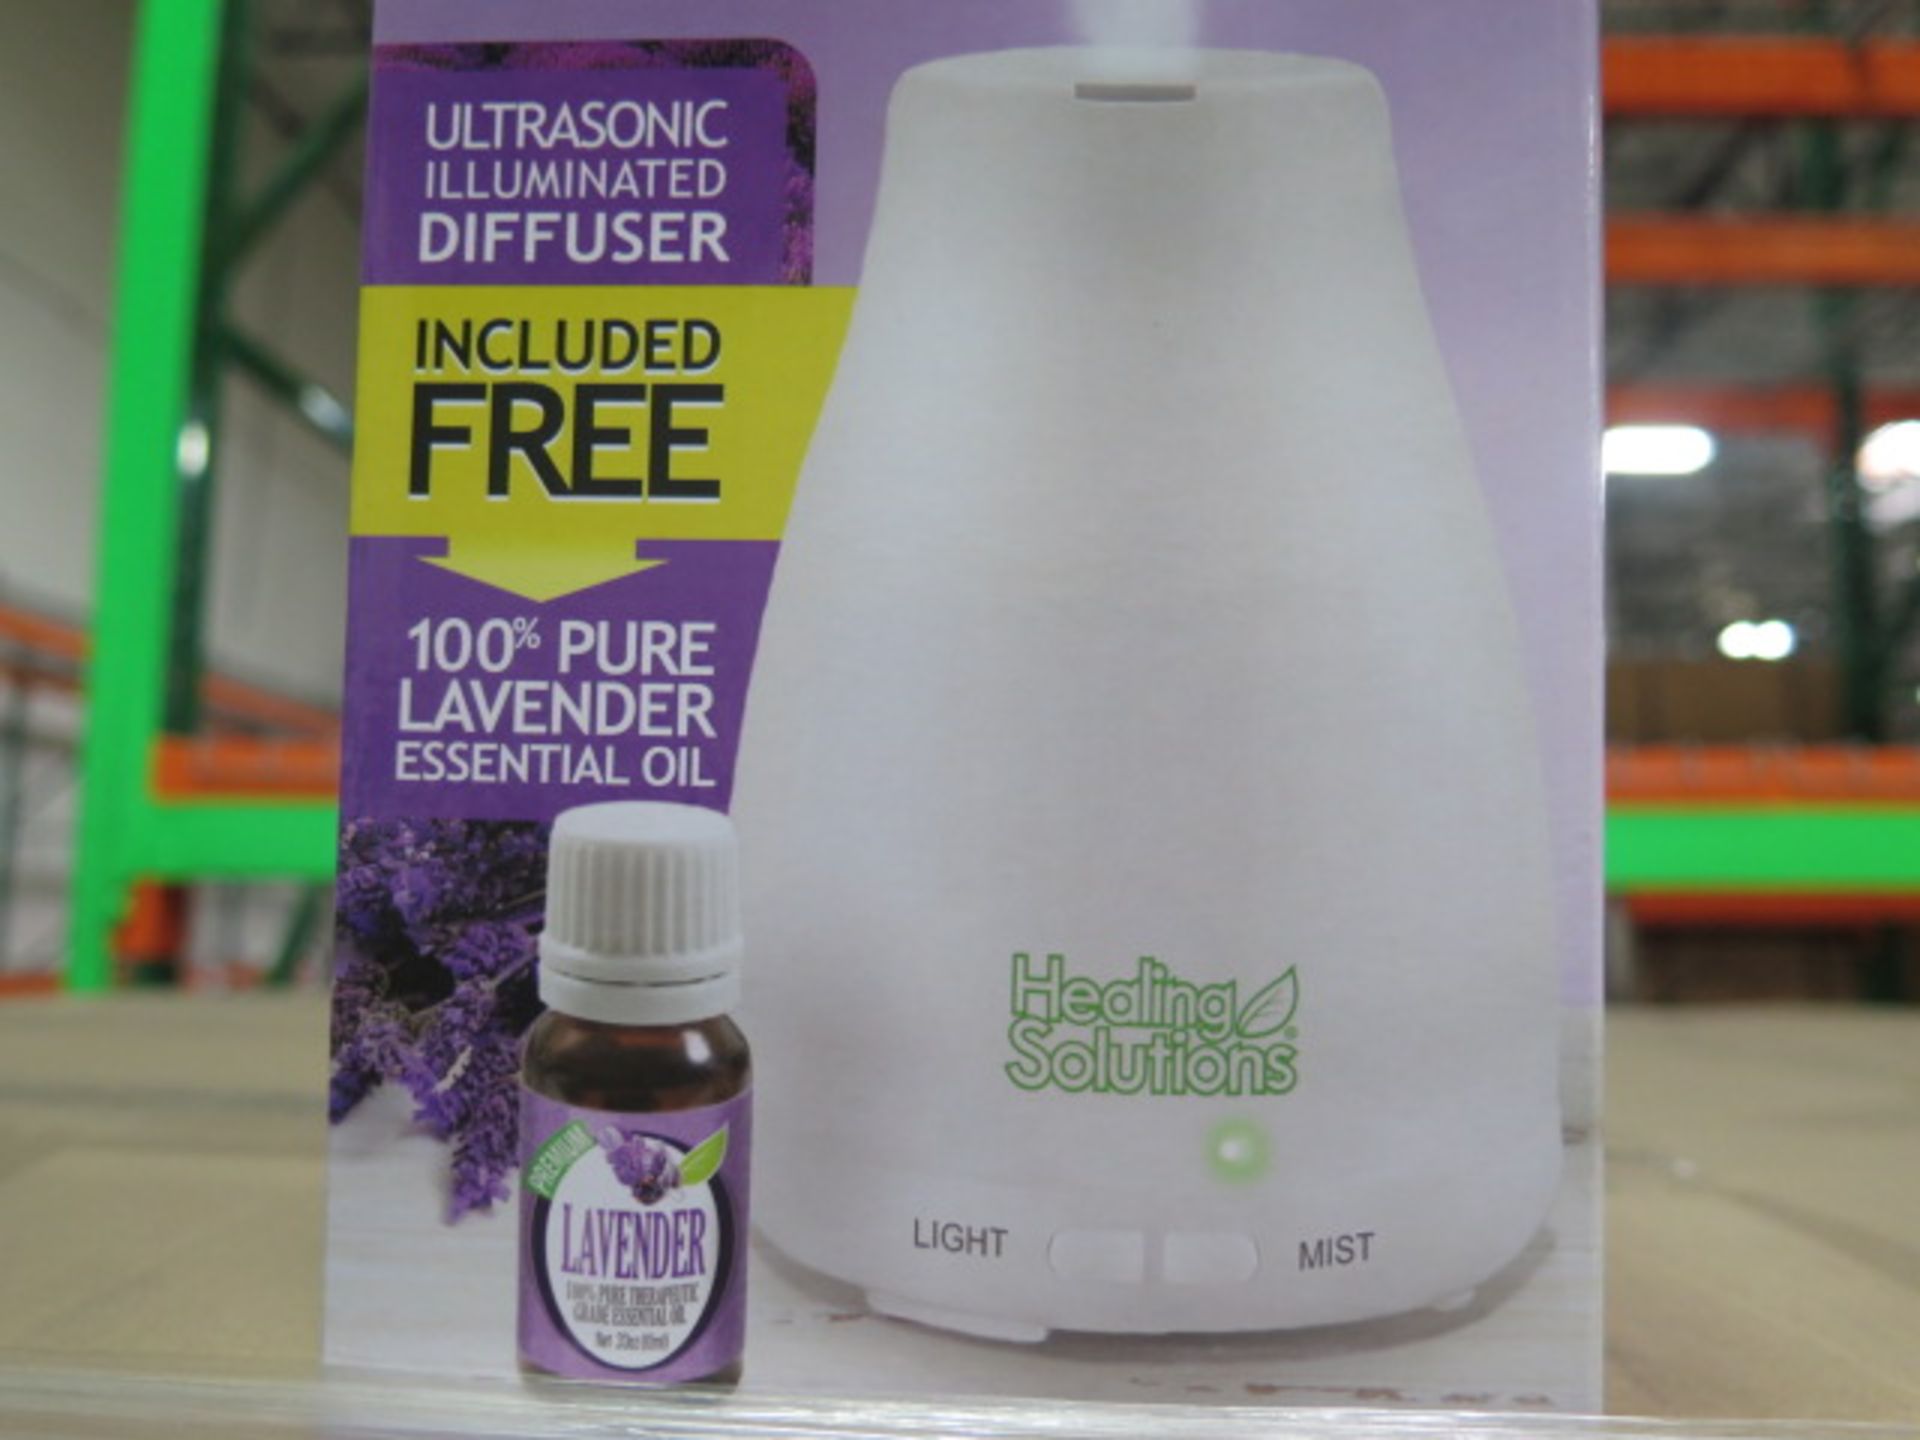 Aromatheropy Ultrasonic Illuminated Diffusers (420-NEW STOCK) (SOLD AS-IS - NO WARRANTY) - Image 3 of 4